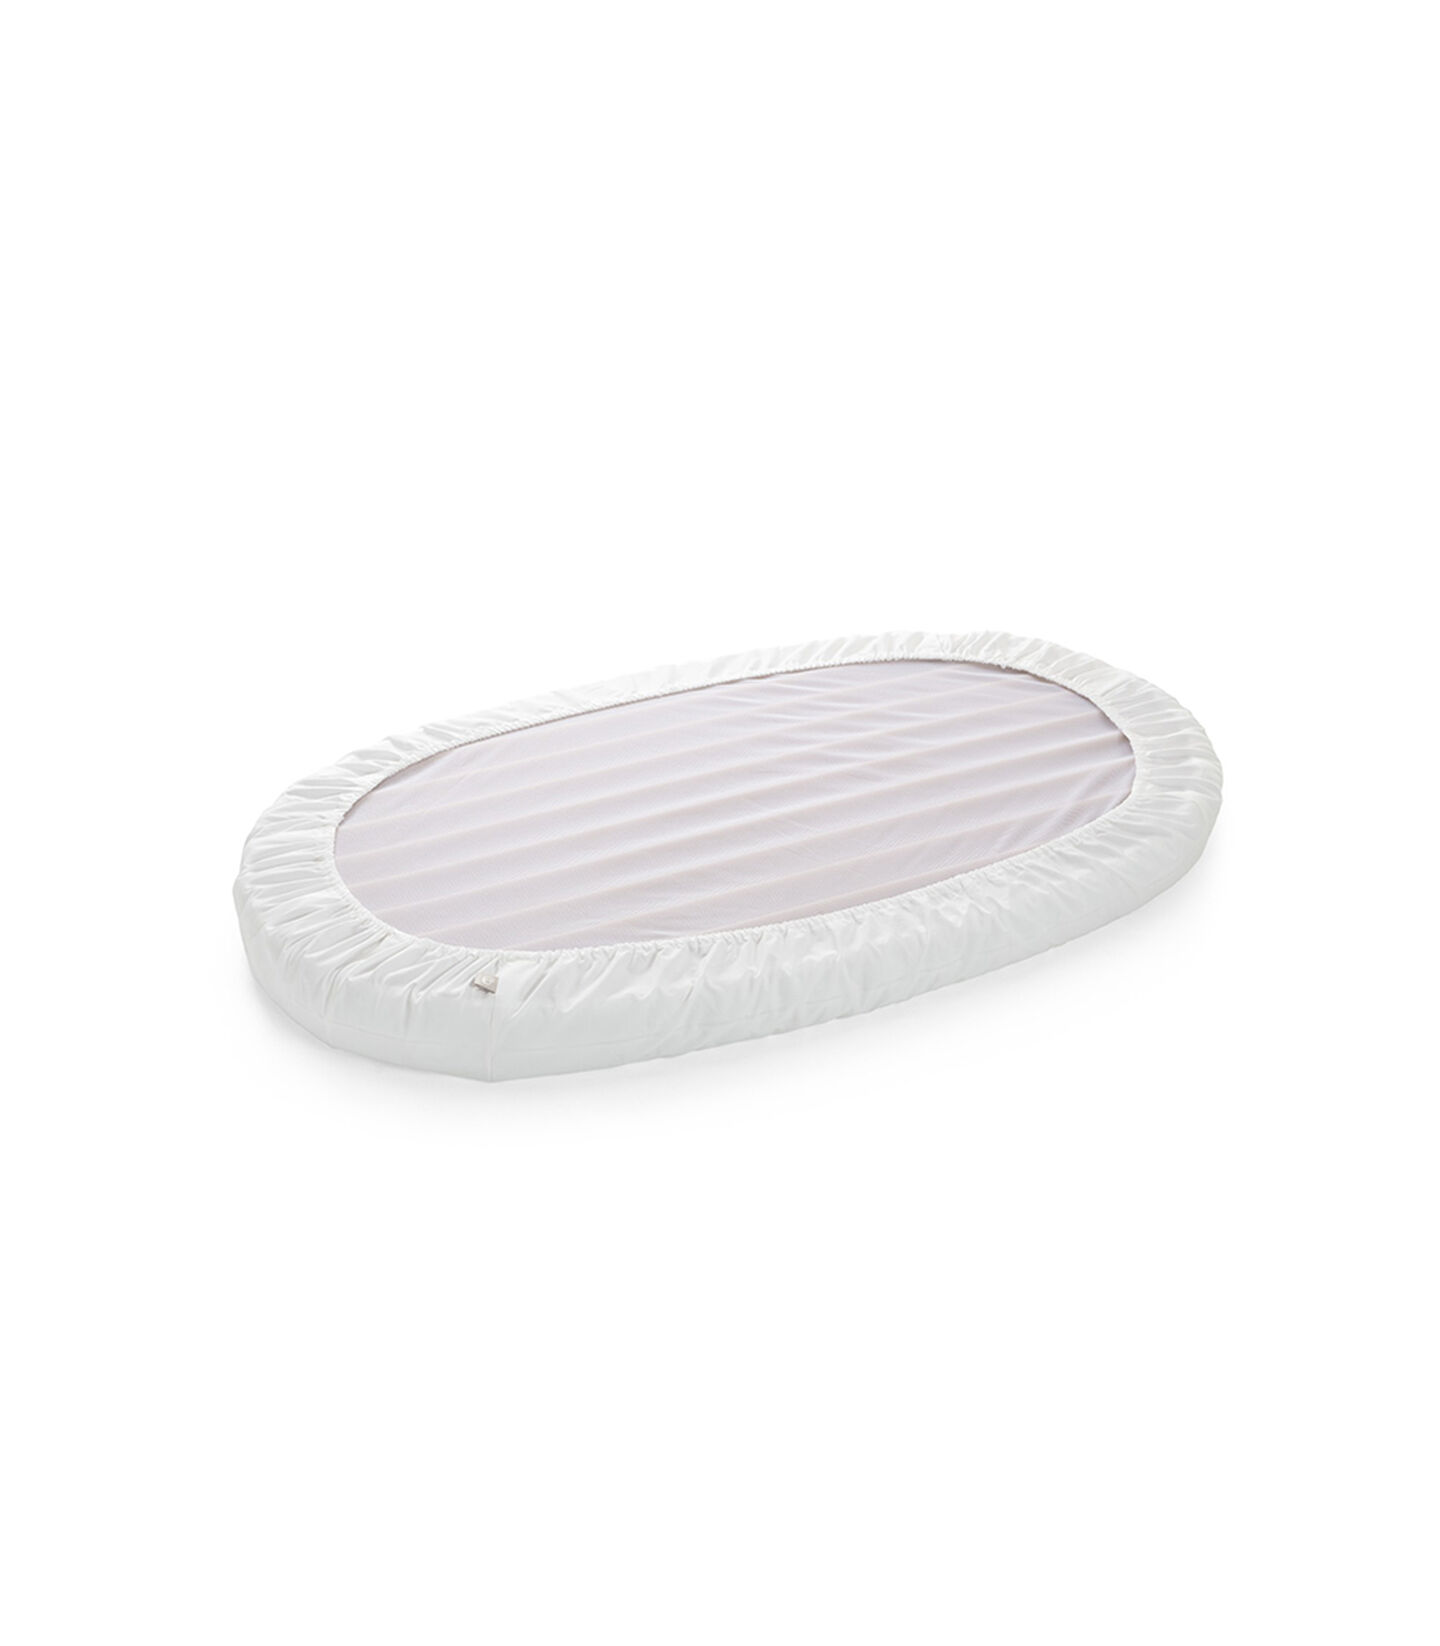 Stokke® Sleepi™ Fitted Sheet Blanc, Blanc, mainview view 2